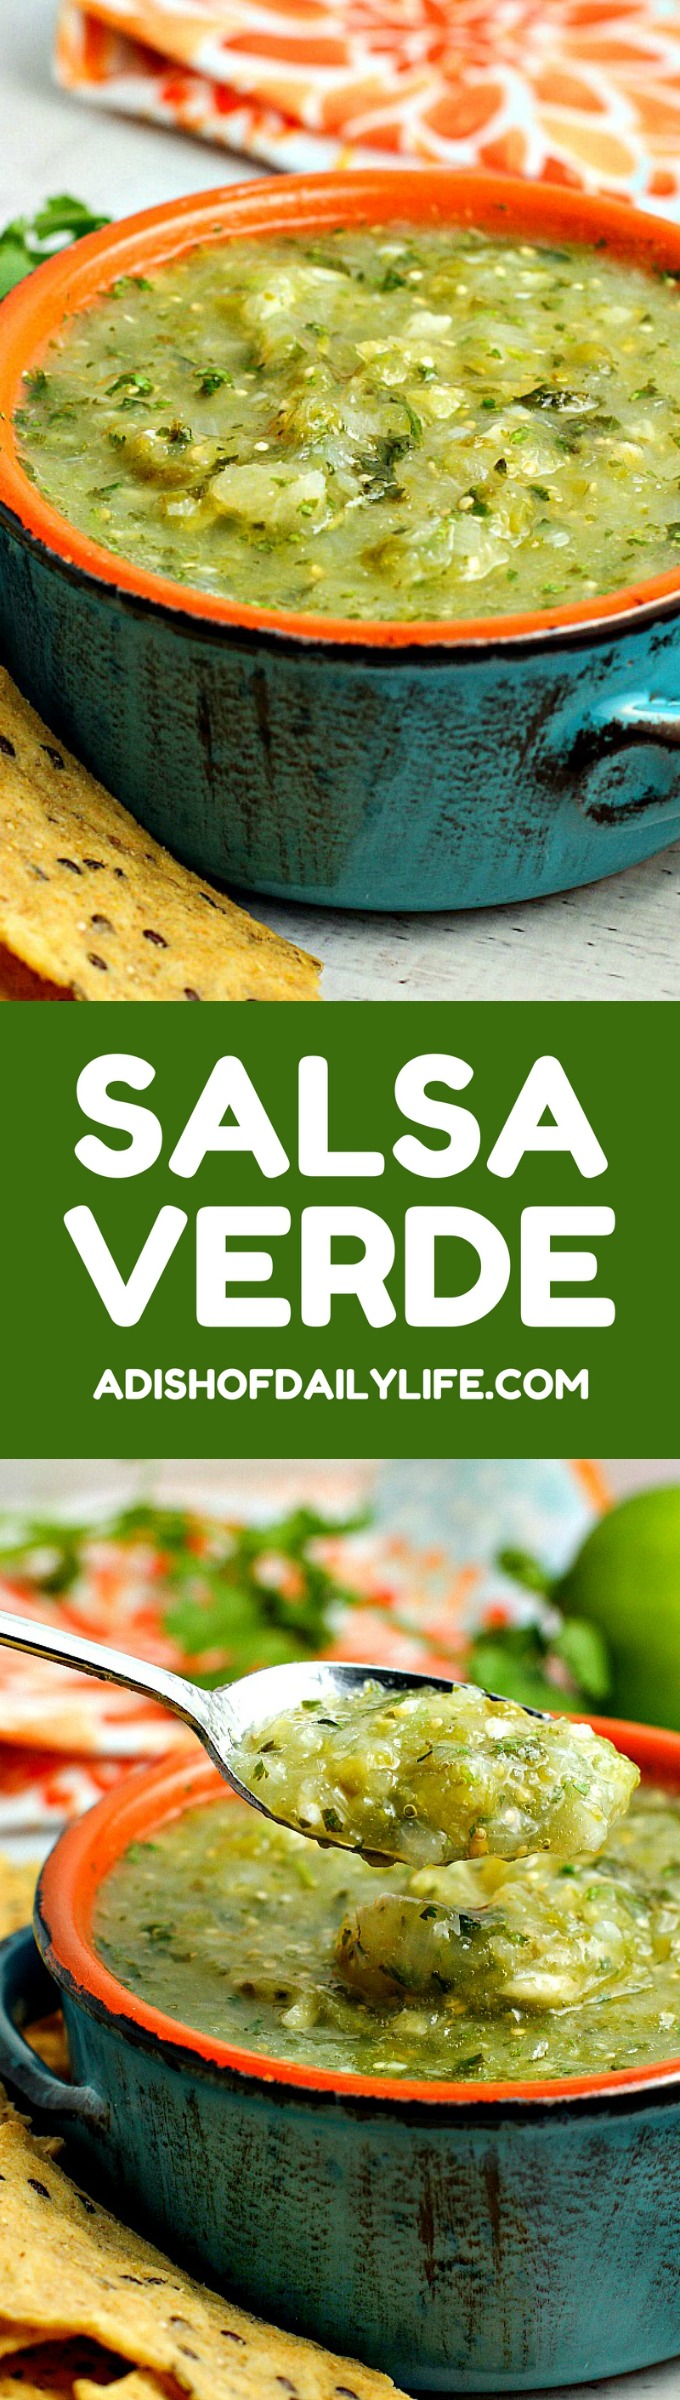 This authentic tangy Salsa Verde will be a hit on game day or Mexican night! It's a versatile recipe...great with chips and nachos, over burritos and enchiladas, as perfect as an accompaniment to just about any Mexican dish!